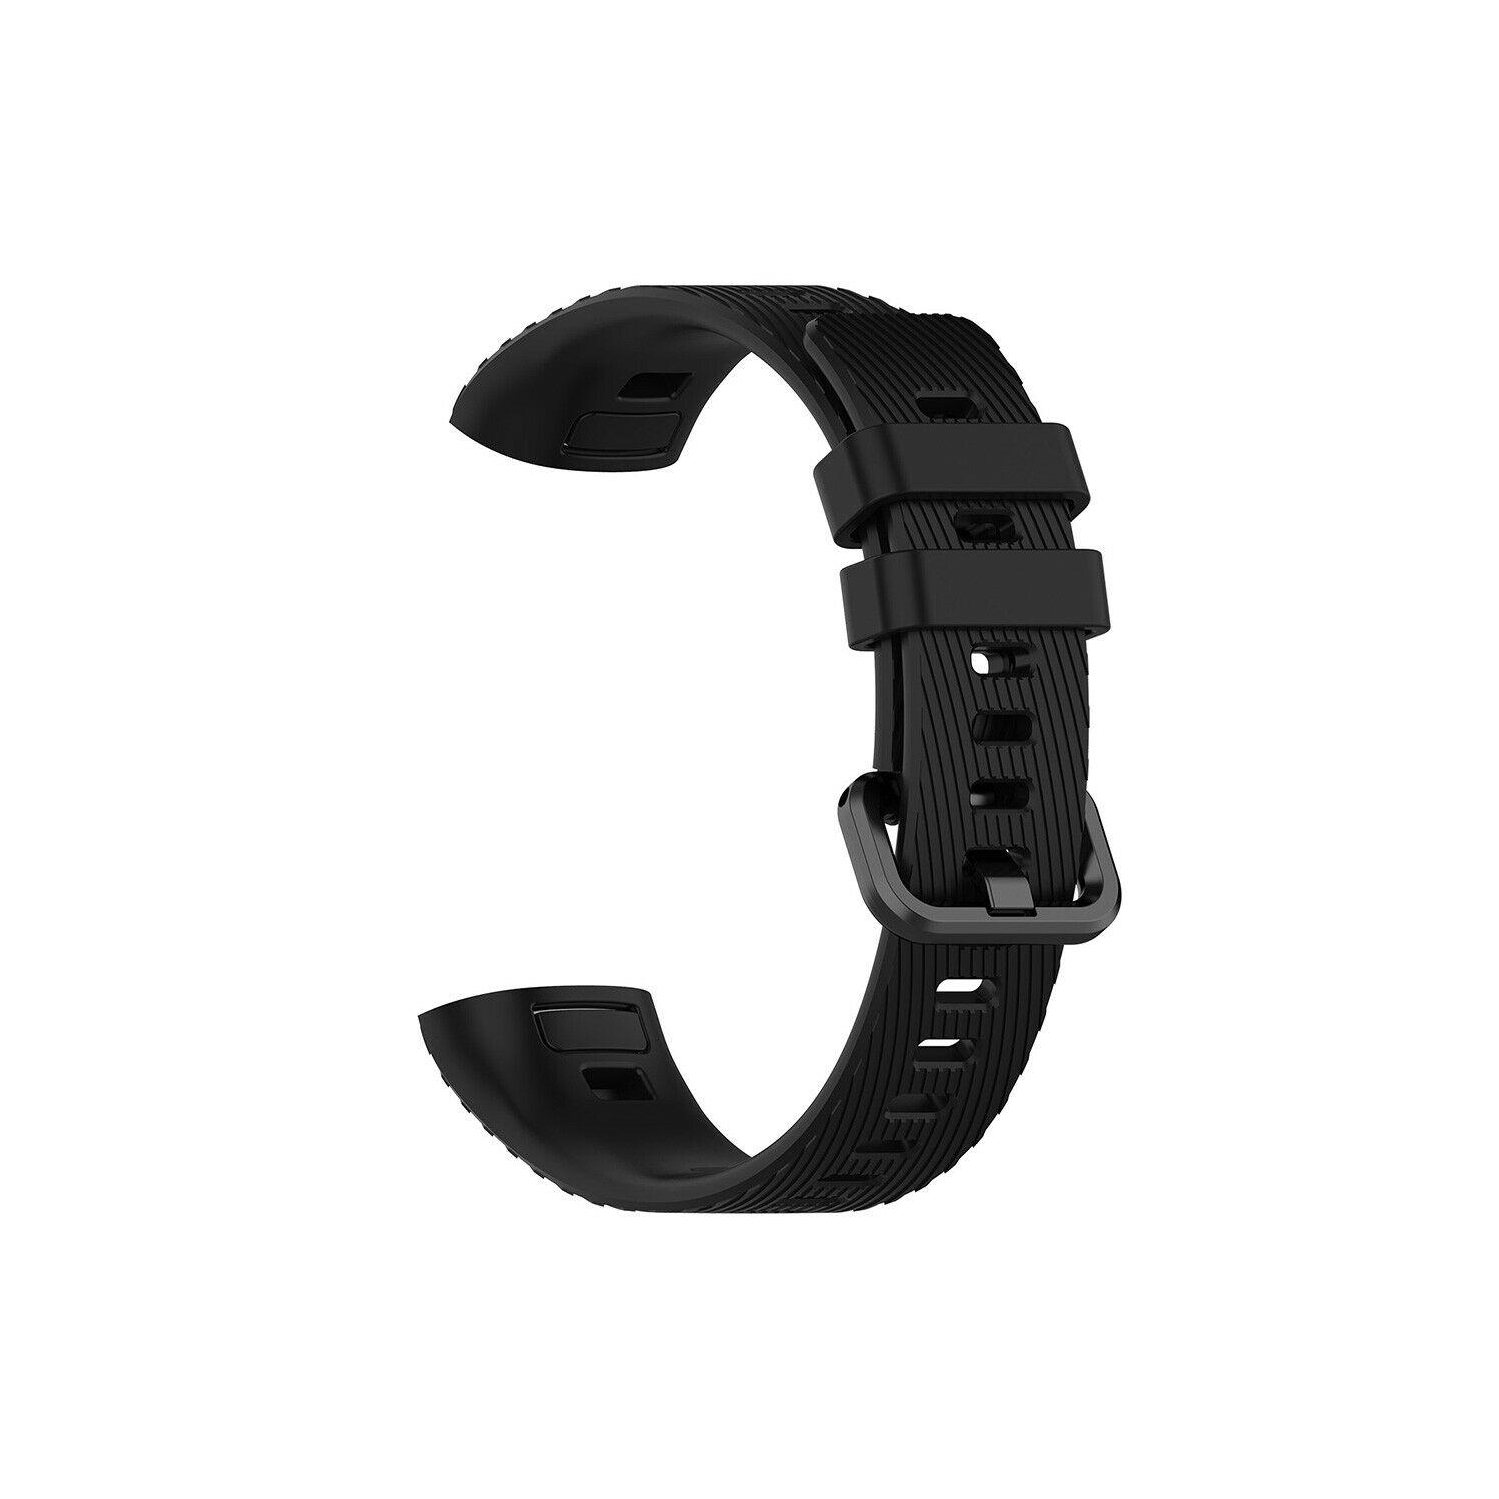 Silicone Watchband Bracelet Strap w/Buckle for Huawei Band 4 Pro TER-B29S